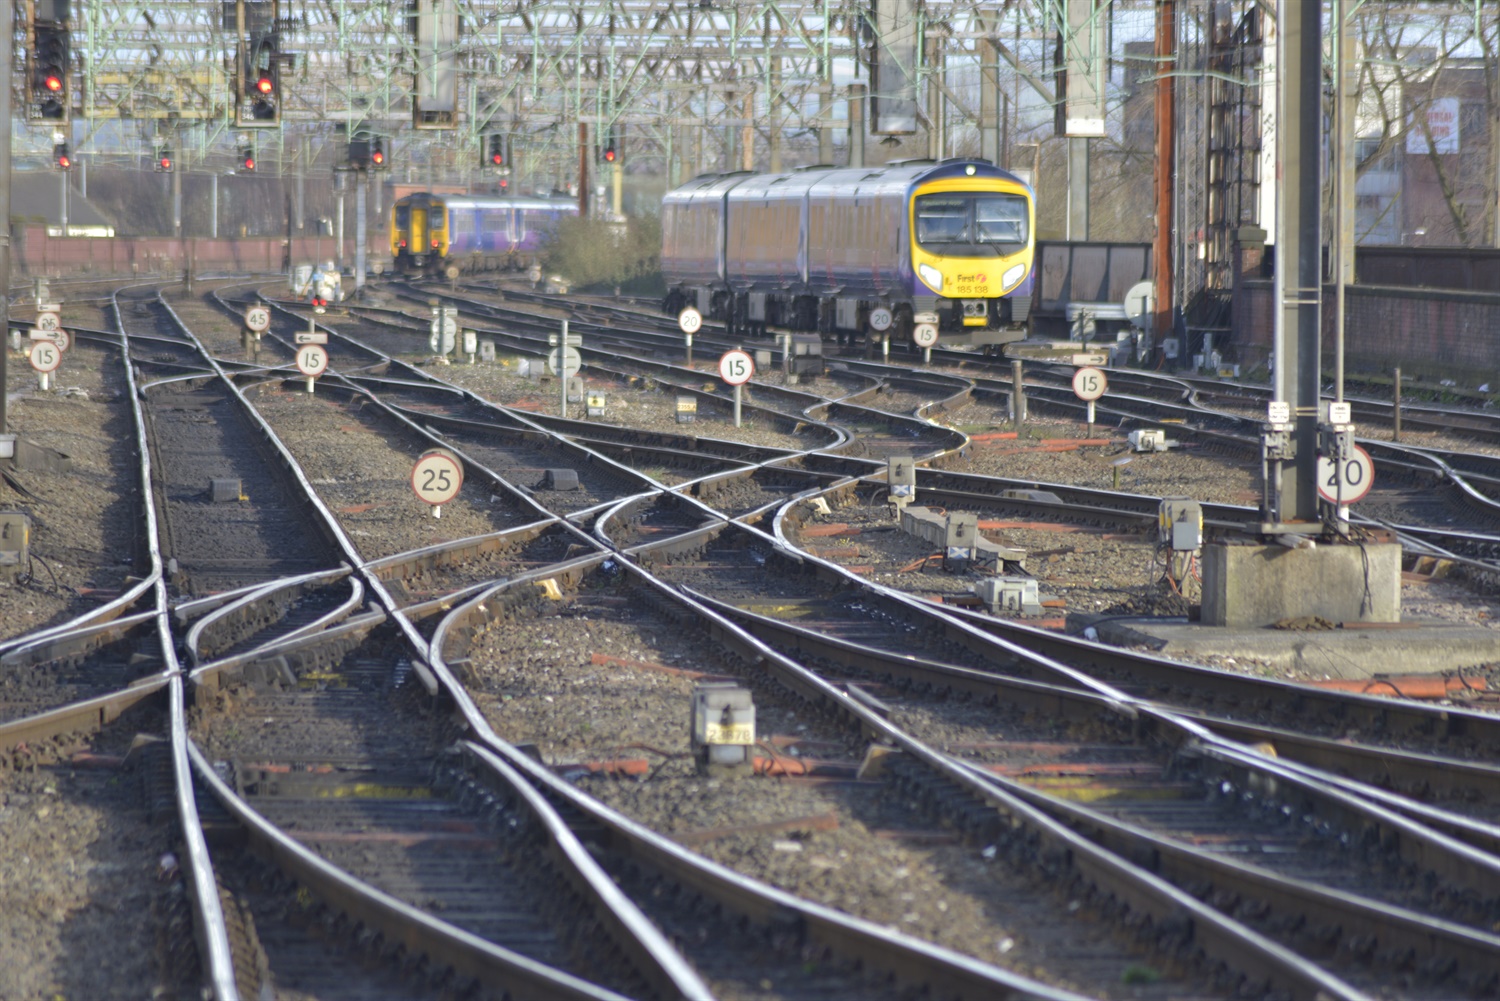 Digital rail and new lines ‘must not be mutually exclusive’ in TransPennine route